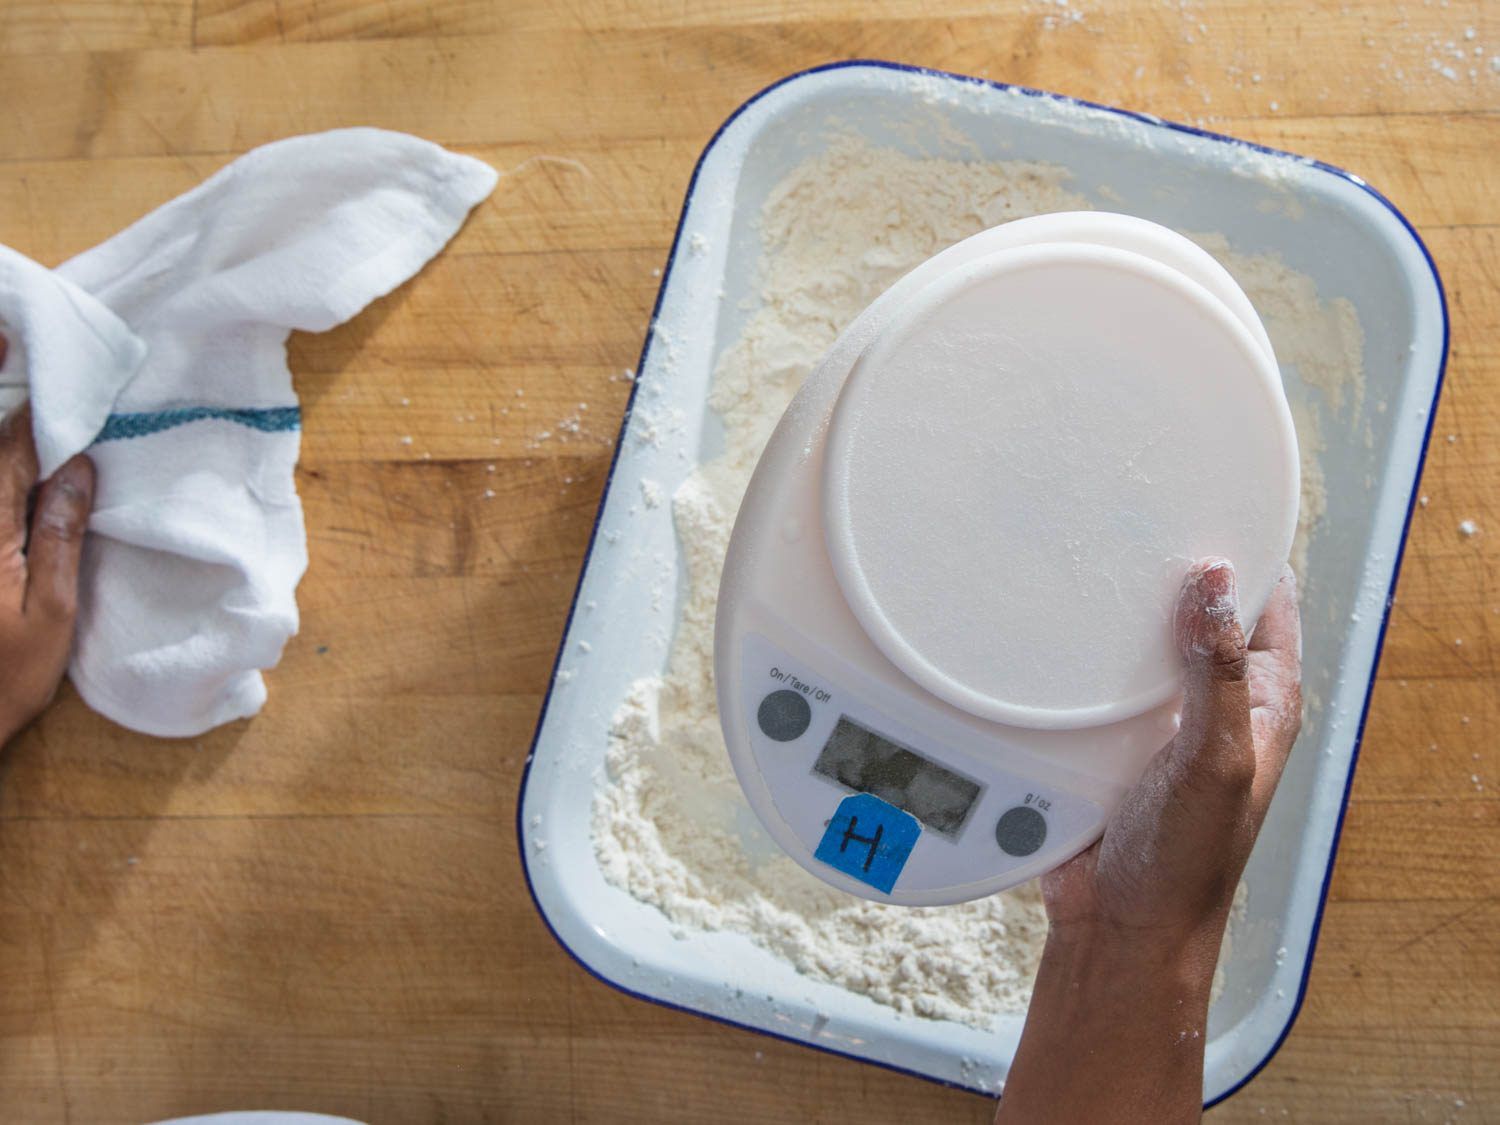 Removing digital kitchen scale from bowl of flour.